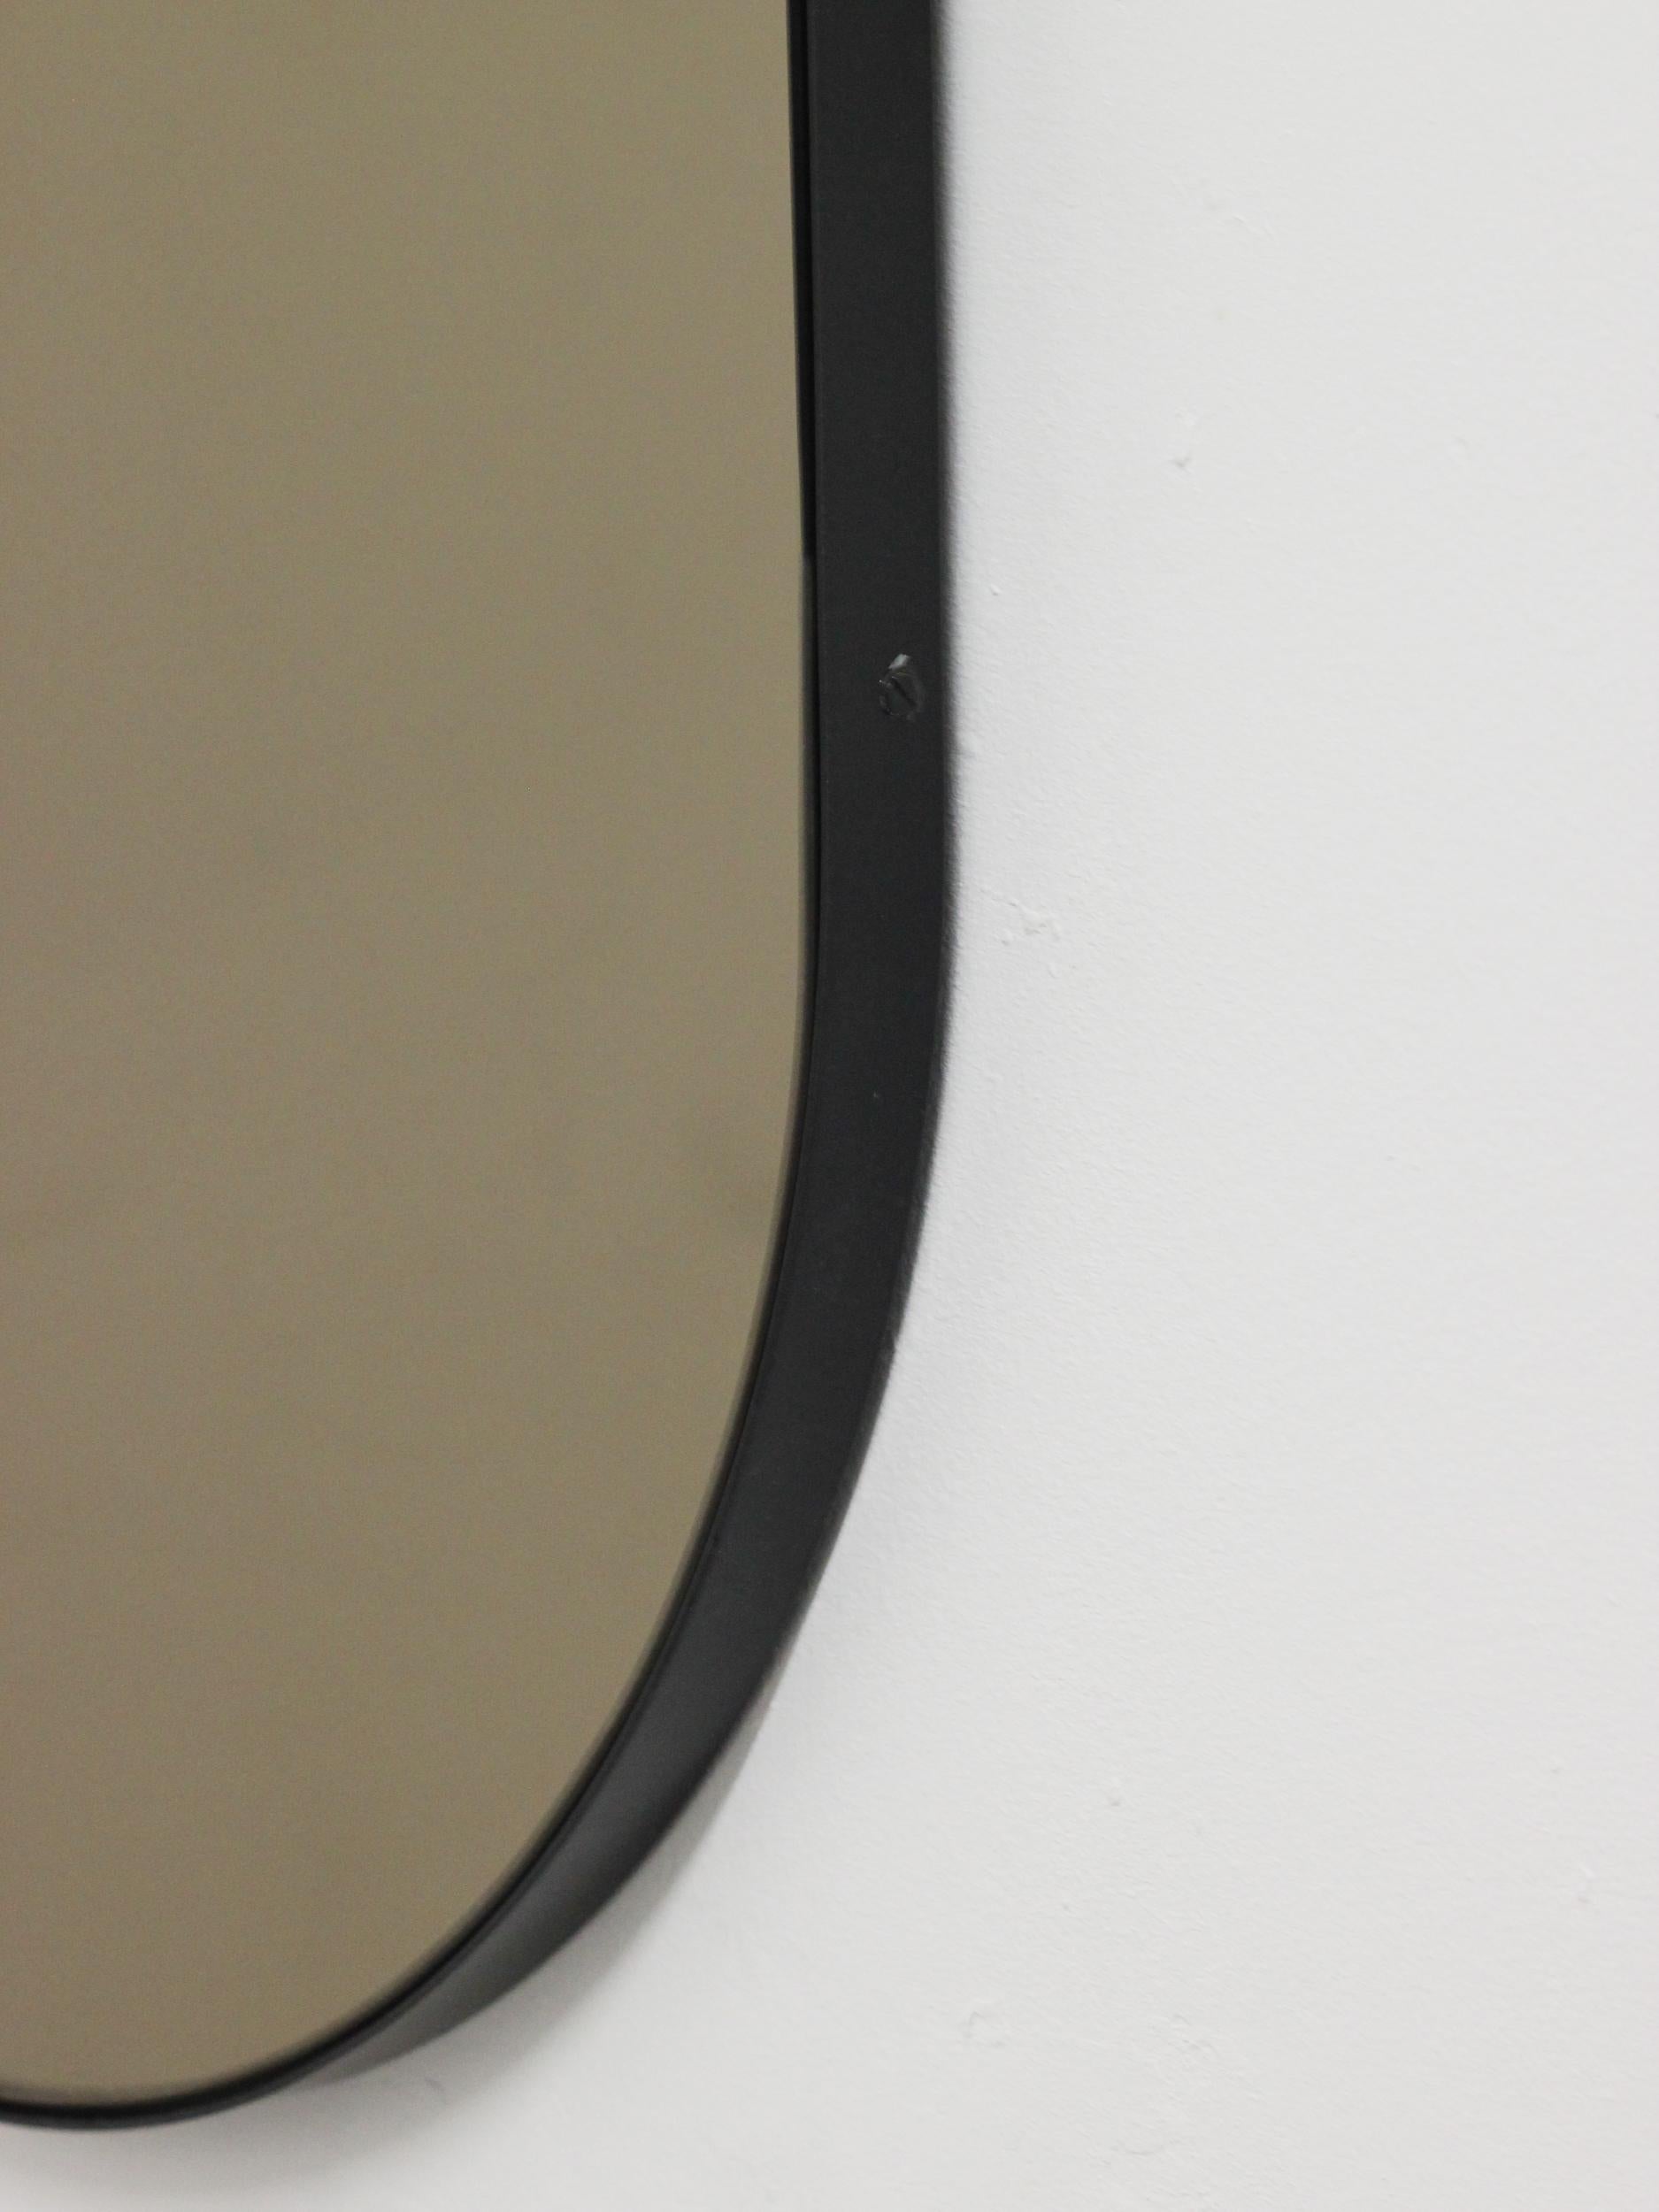 Aluminum Capsula Capsule shaped Bronze Contemporary Mirror with Black Frame, Large For Sale